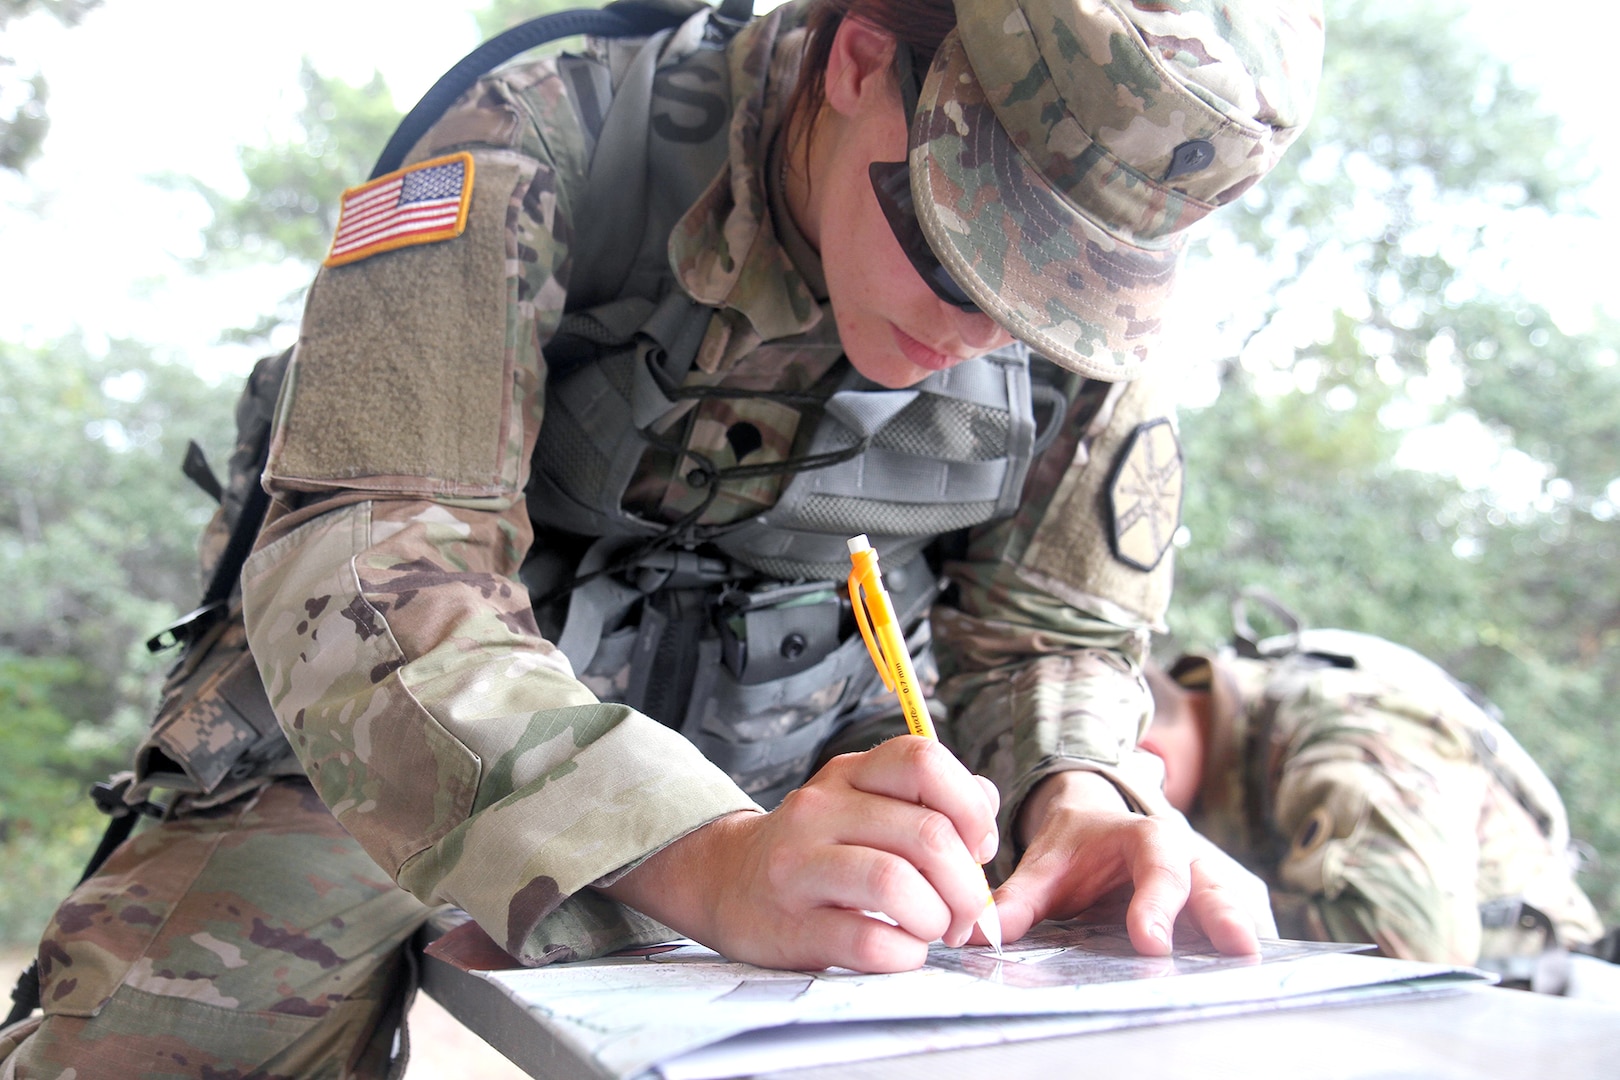 Spc. Lillian Lewis, from Installation Management Command at Fort Riley, Kan., plots her points on a map during the Best Warrior Competition’s day land navigation course June 30 at Joint Base San Antonio-Camp Bullis.